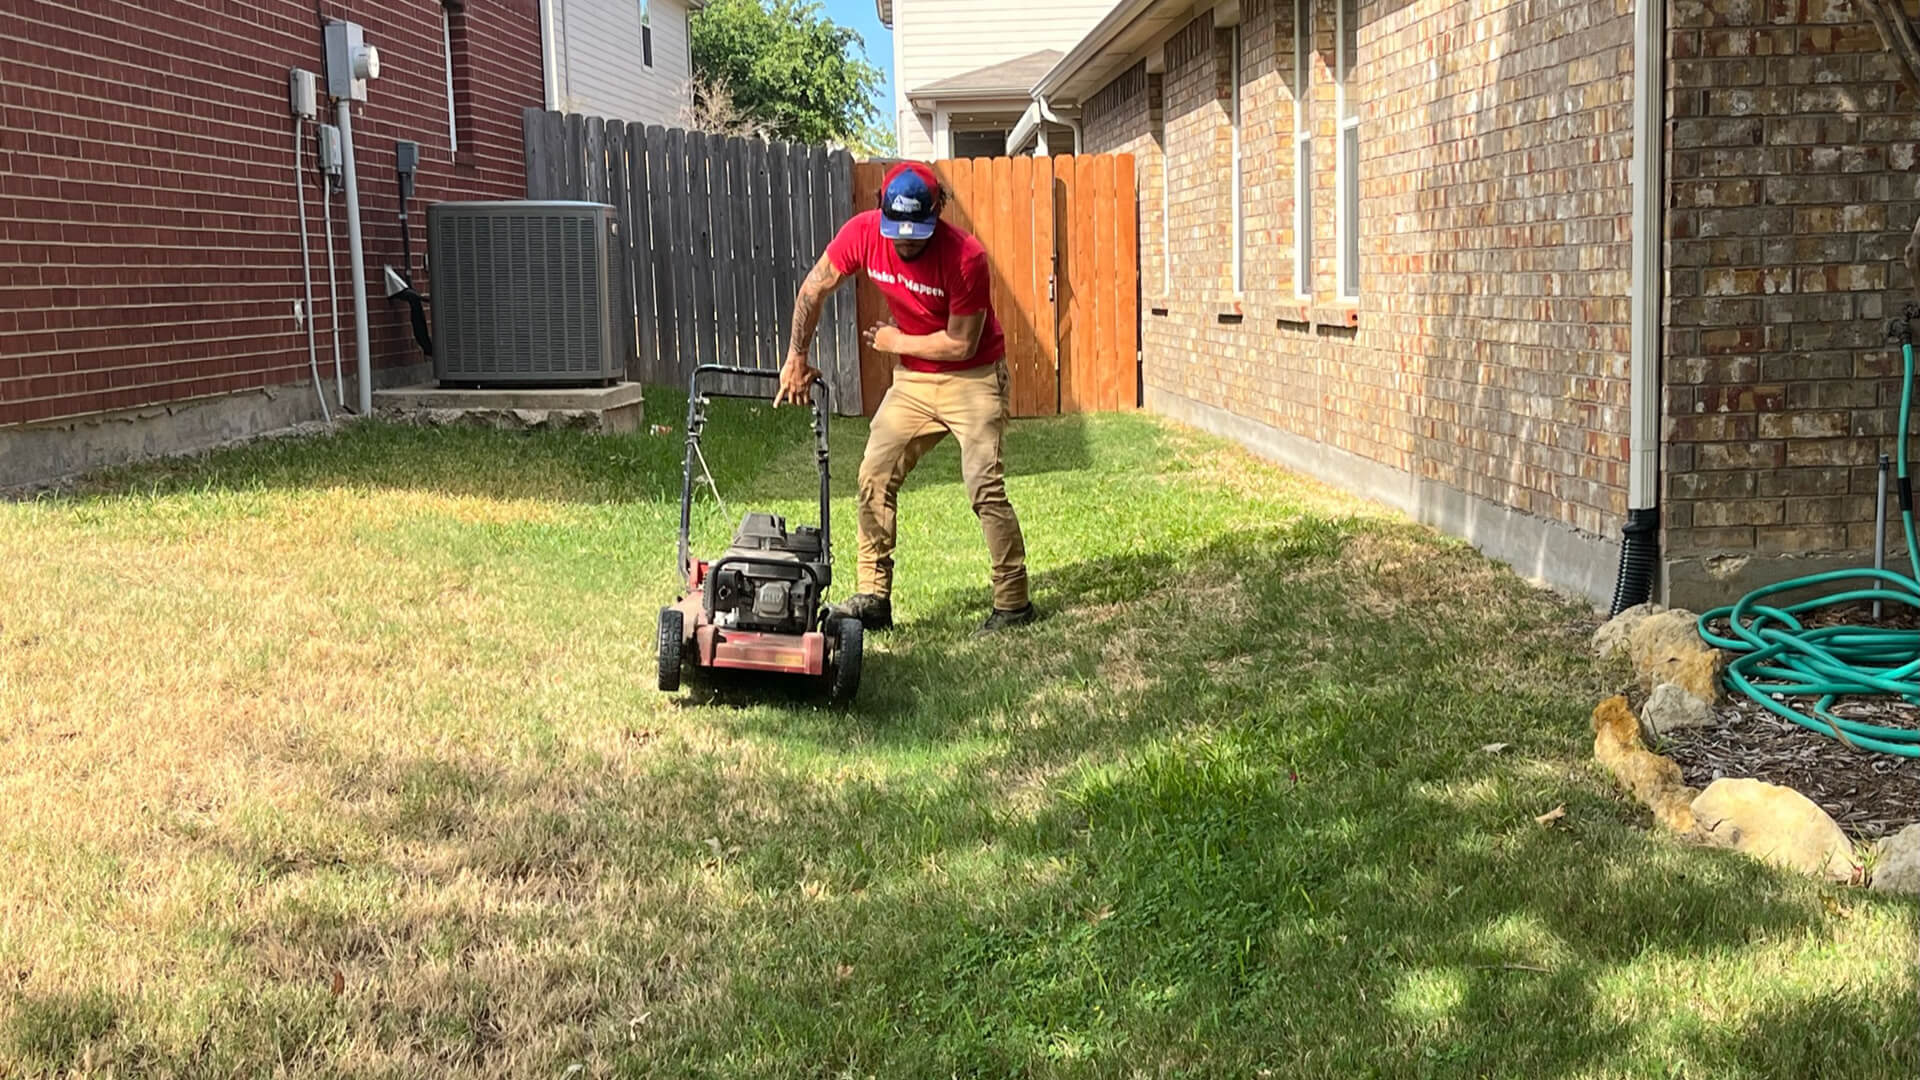 First Cut Lawn Services worker mowing a lawn in Keller, Texas.